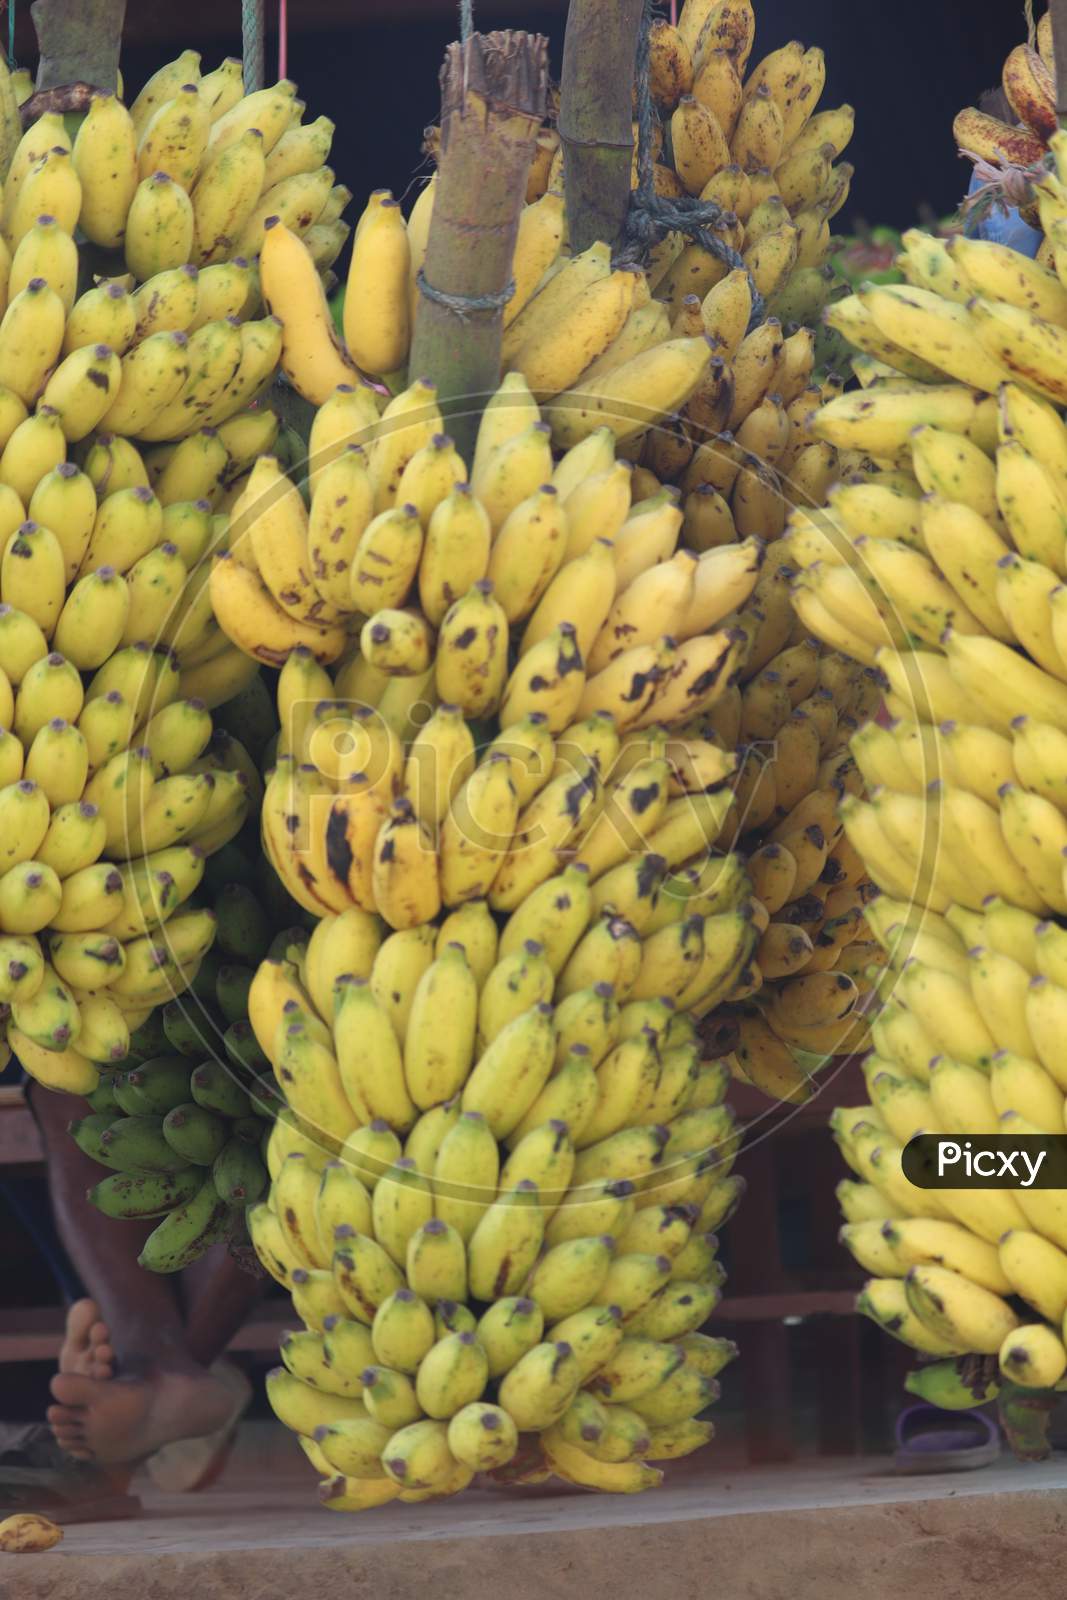 The large hanging cluster of yellow banana fruits. (selective focus )of banana cluster.